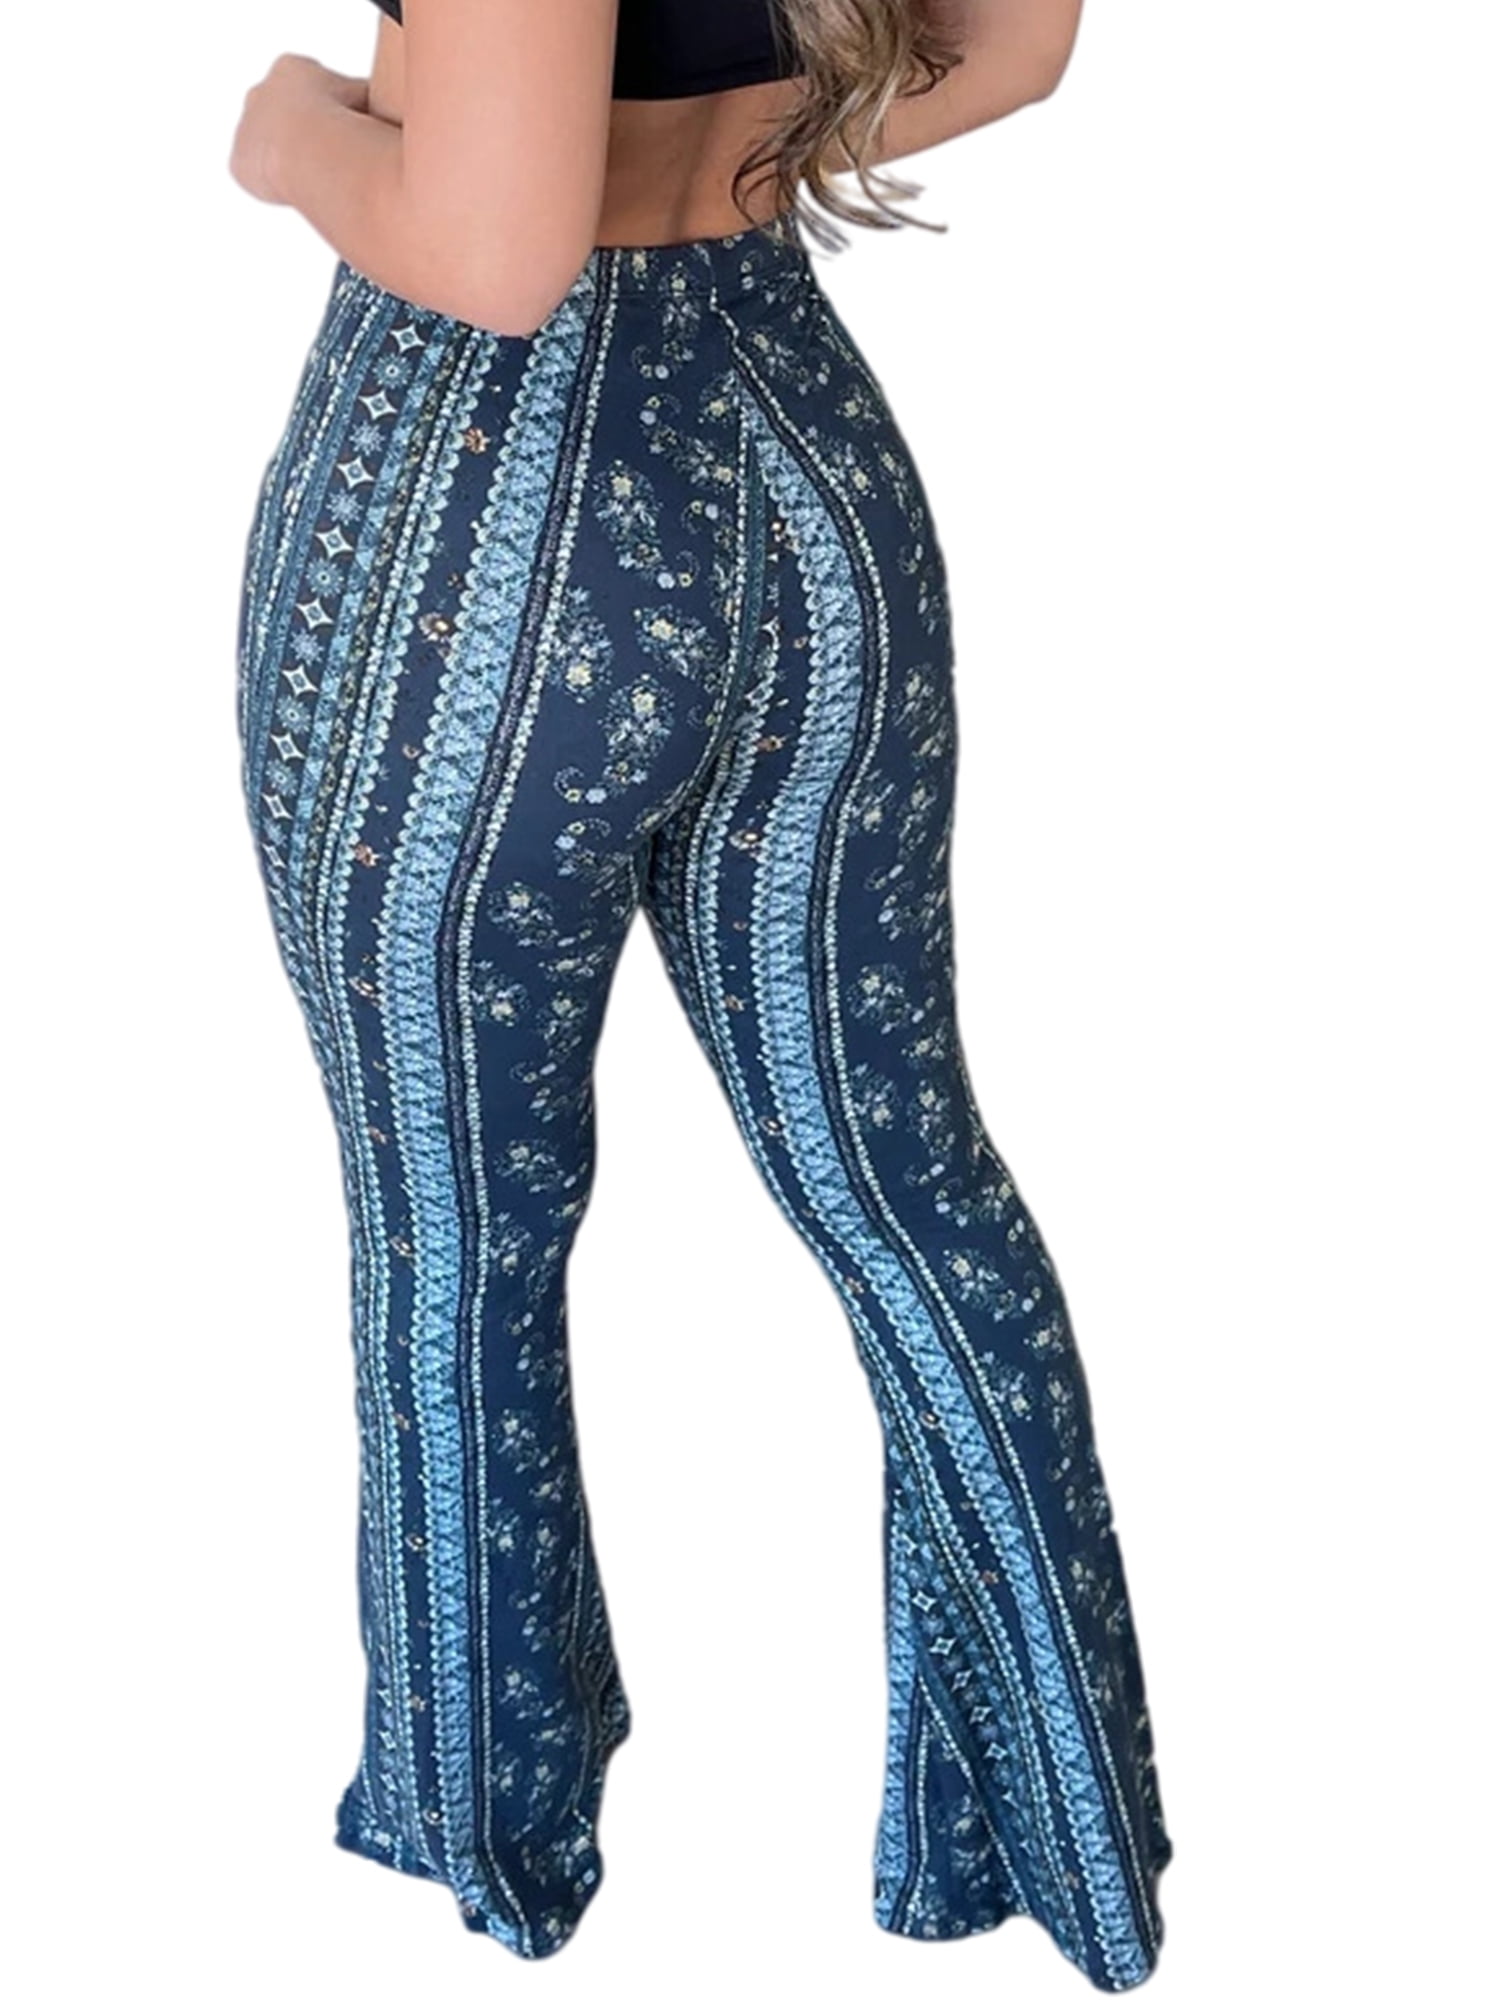 Sexy Dance Women Trousers Cropped Yoga Pants Elastic Waisted Leggings  Breathable Bottoms Floral Print Jeggings Blue XS 